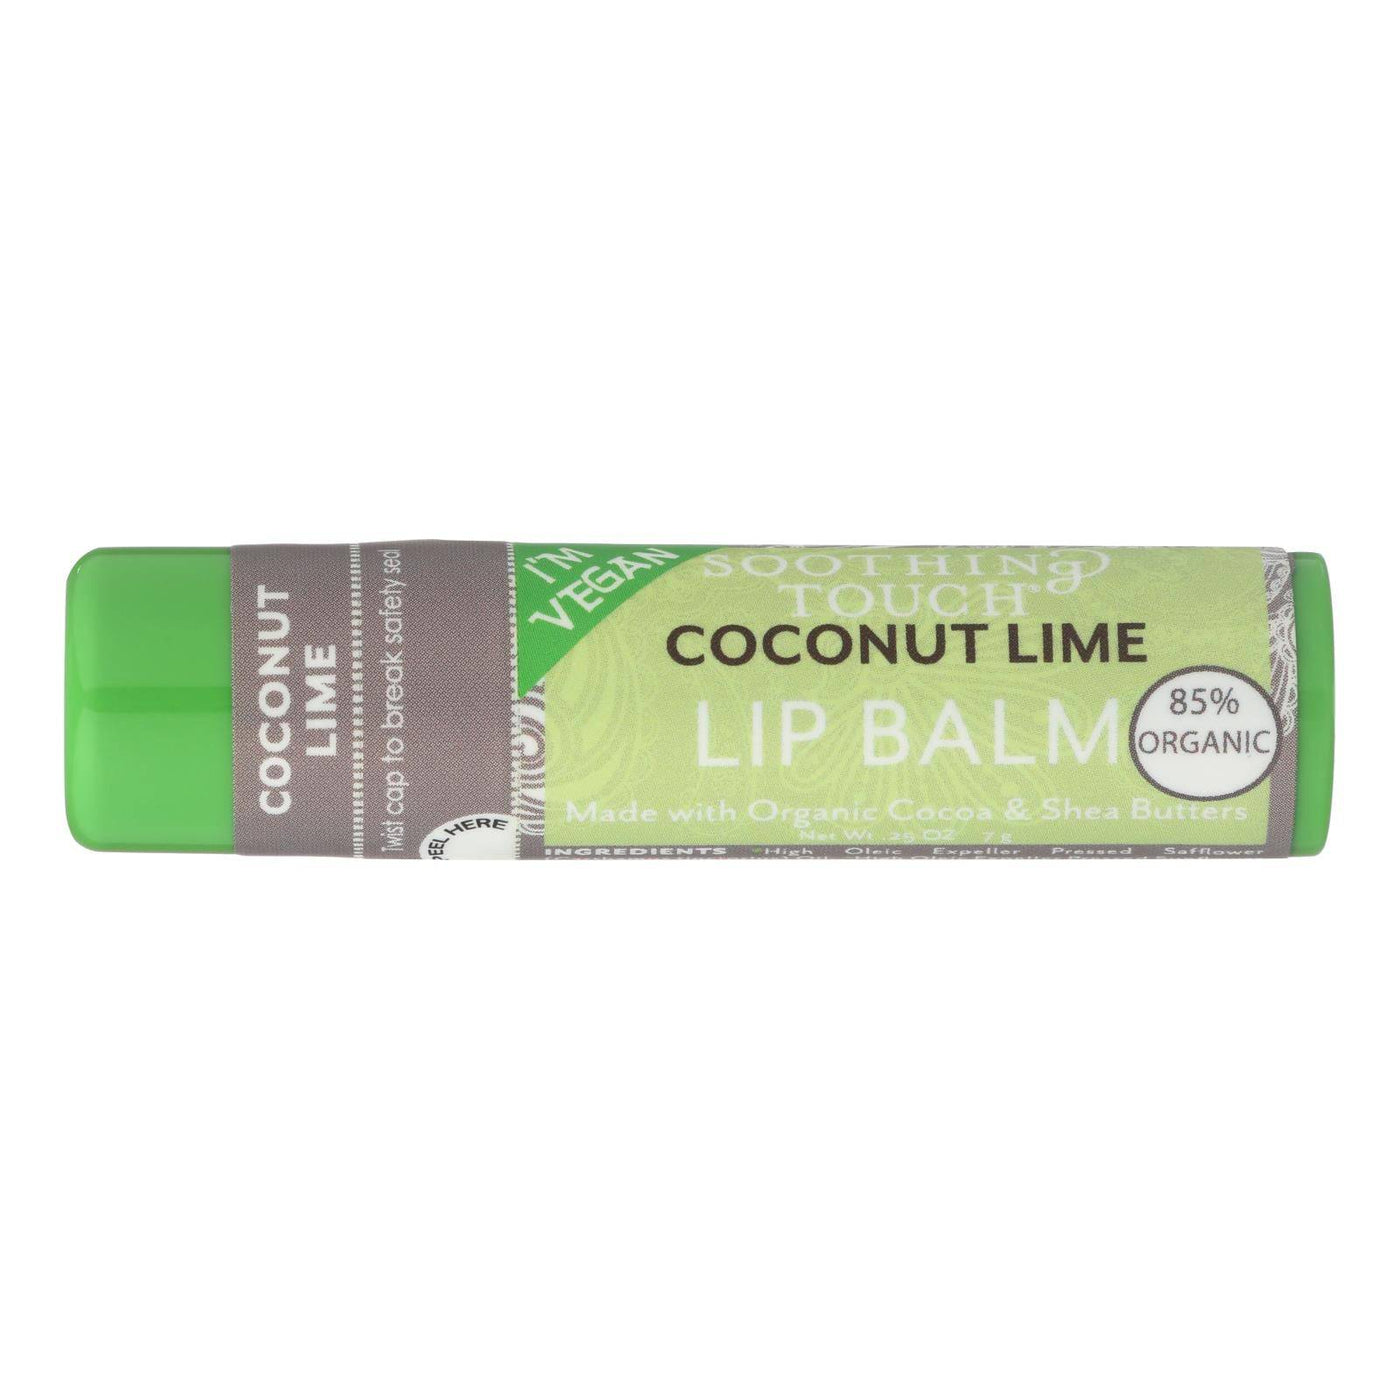 Soothing Touch Lip Balm - Organic Coconut Lime - Case Of 12 - .25 Oz | OnlyNaturals.us